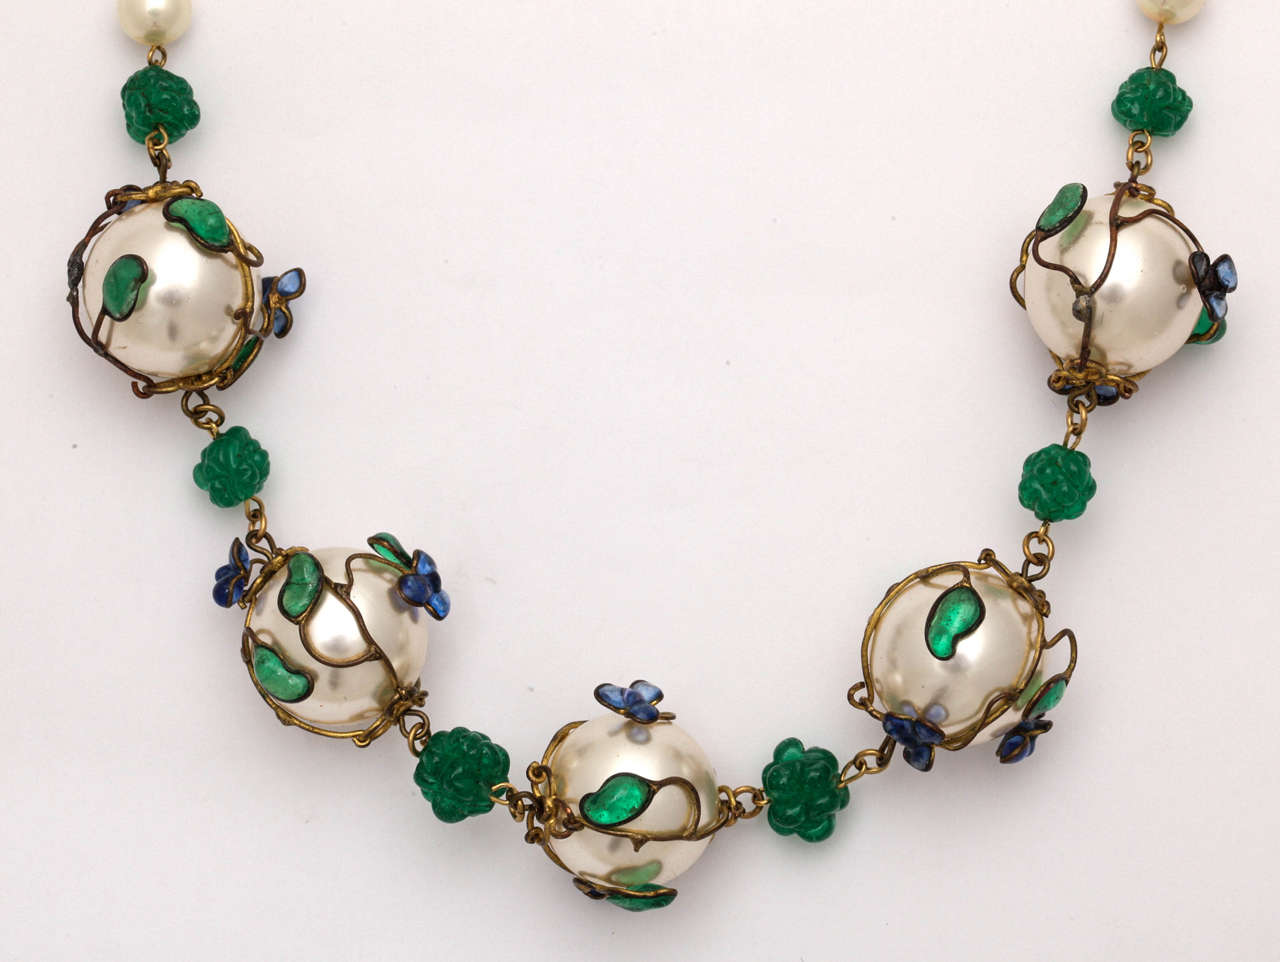 Hollywood Regency Vintage Chanel Poured Glass and Wired 'Pearl' Necklace